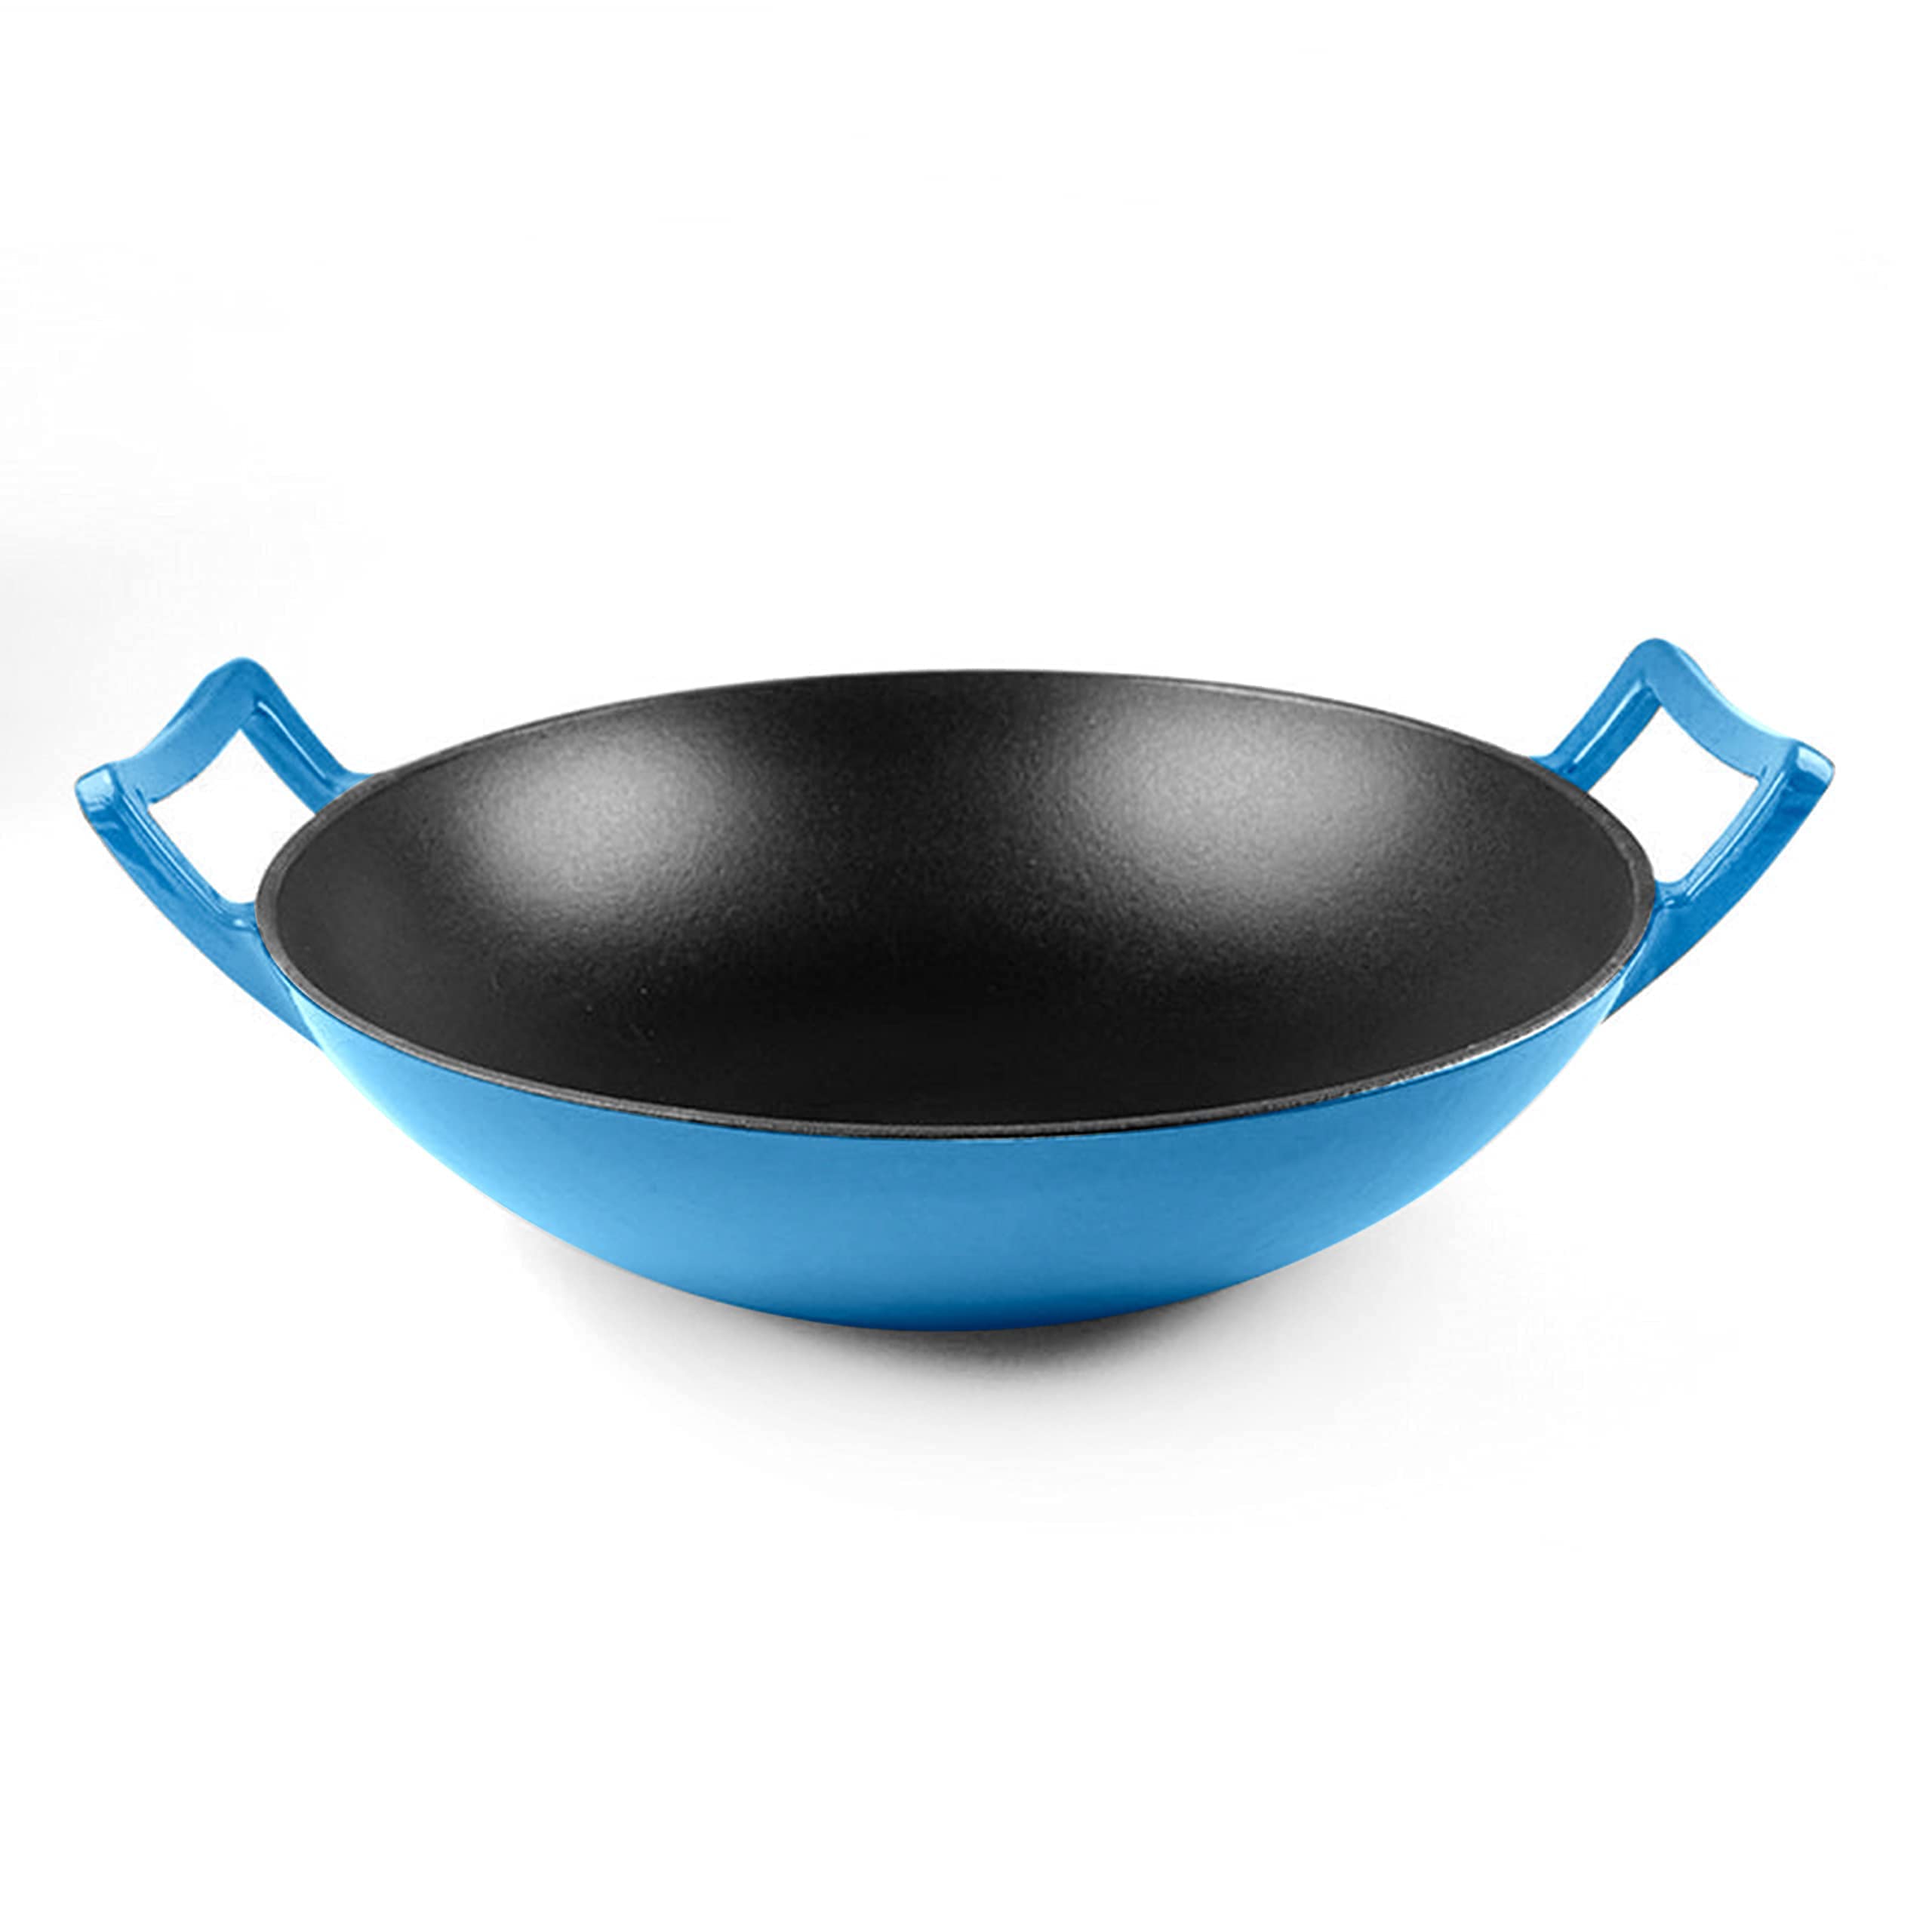 Bruntmor 14 Inch Blue Enameled Cast Iron Wok/Pot - Nonstick Skillet Pan with Large Loop Handles for Versatile Cooking - Oven Safe & Electric Stovetop Compatible - Indoor and Outdoor Culinary Essential